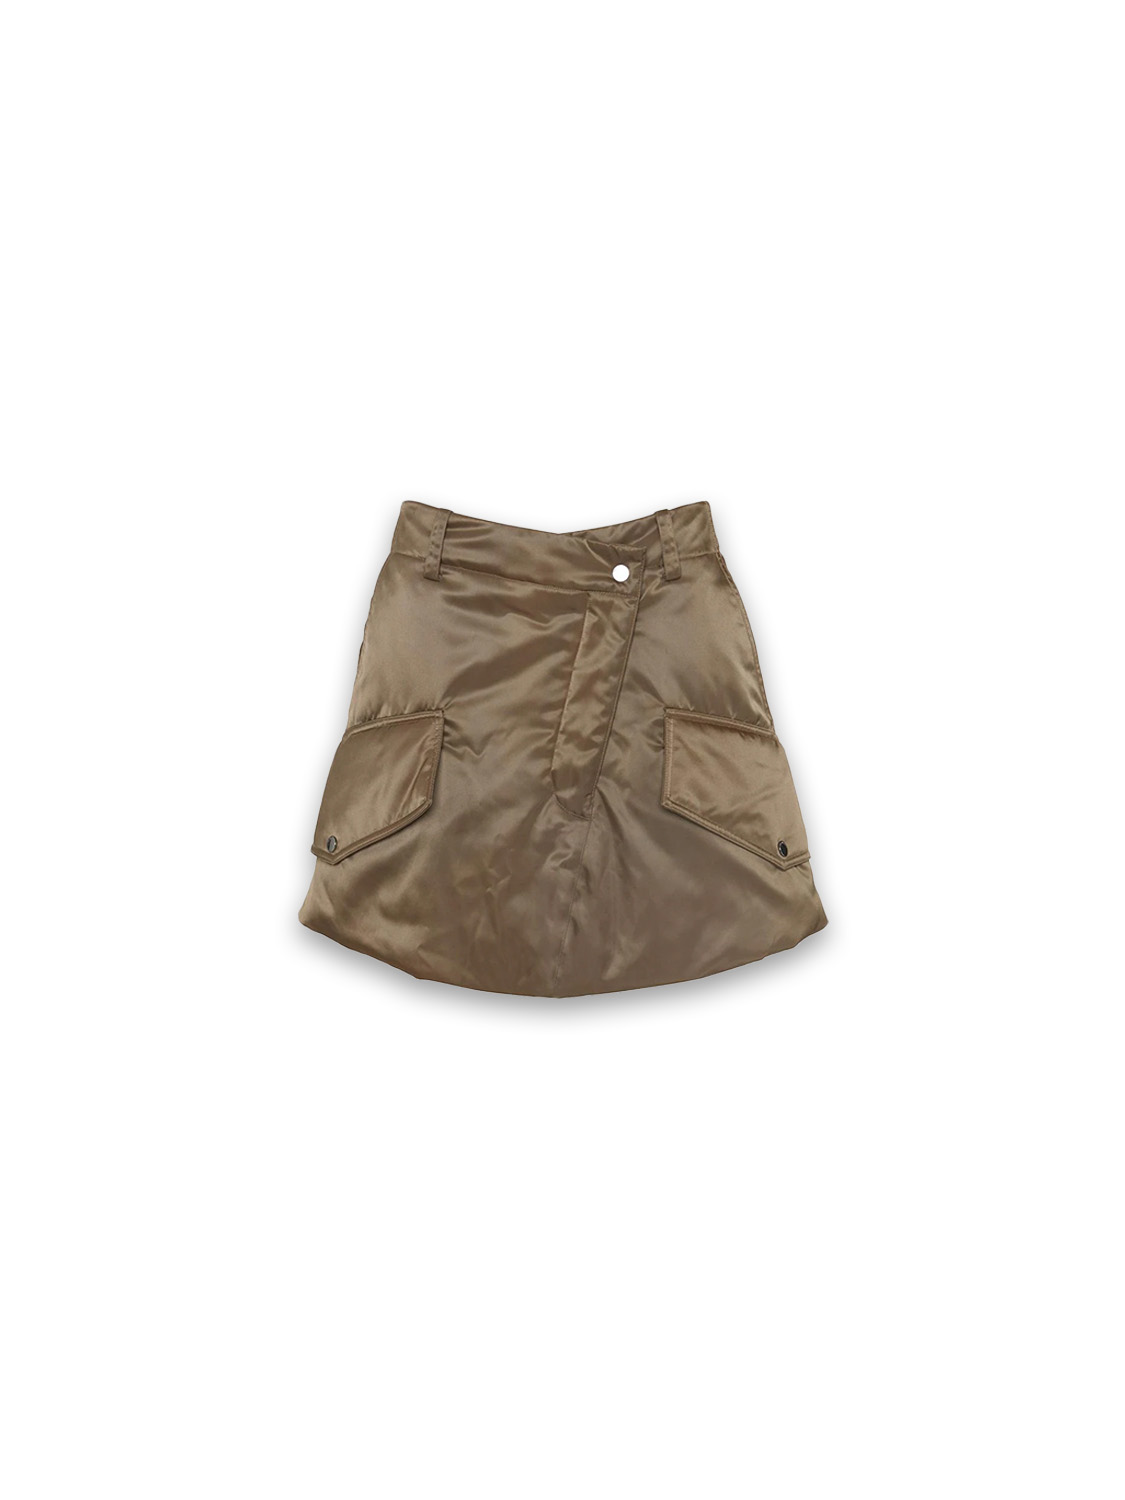 JW Anderson Padded - Padded mini skirt in cargo style beige 34